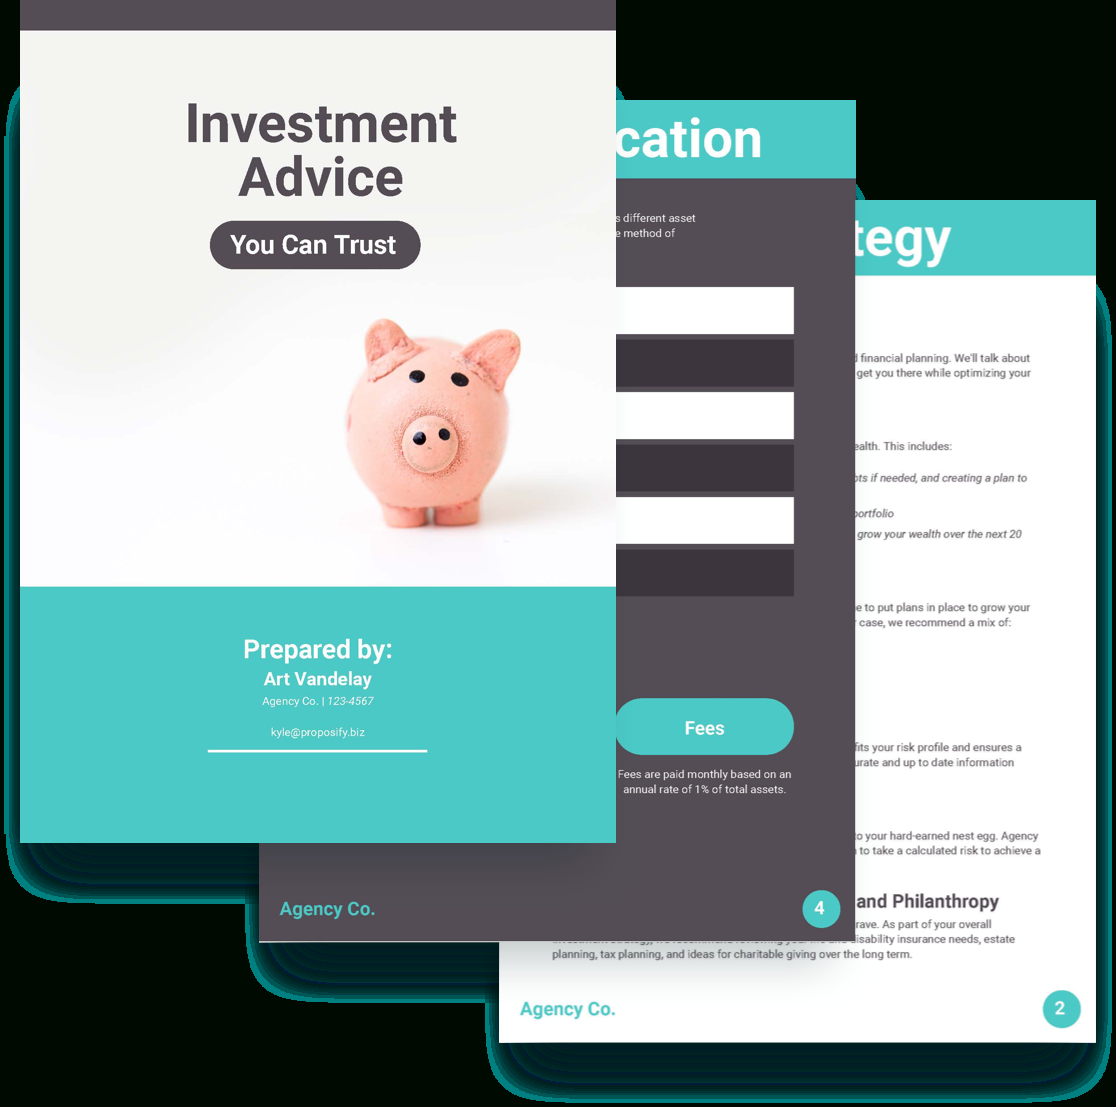 Investment Proposal Template – Free Sample | Proposify With Regard To Investment Proposal Template